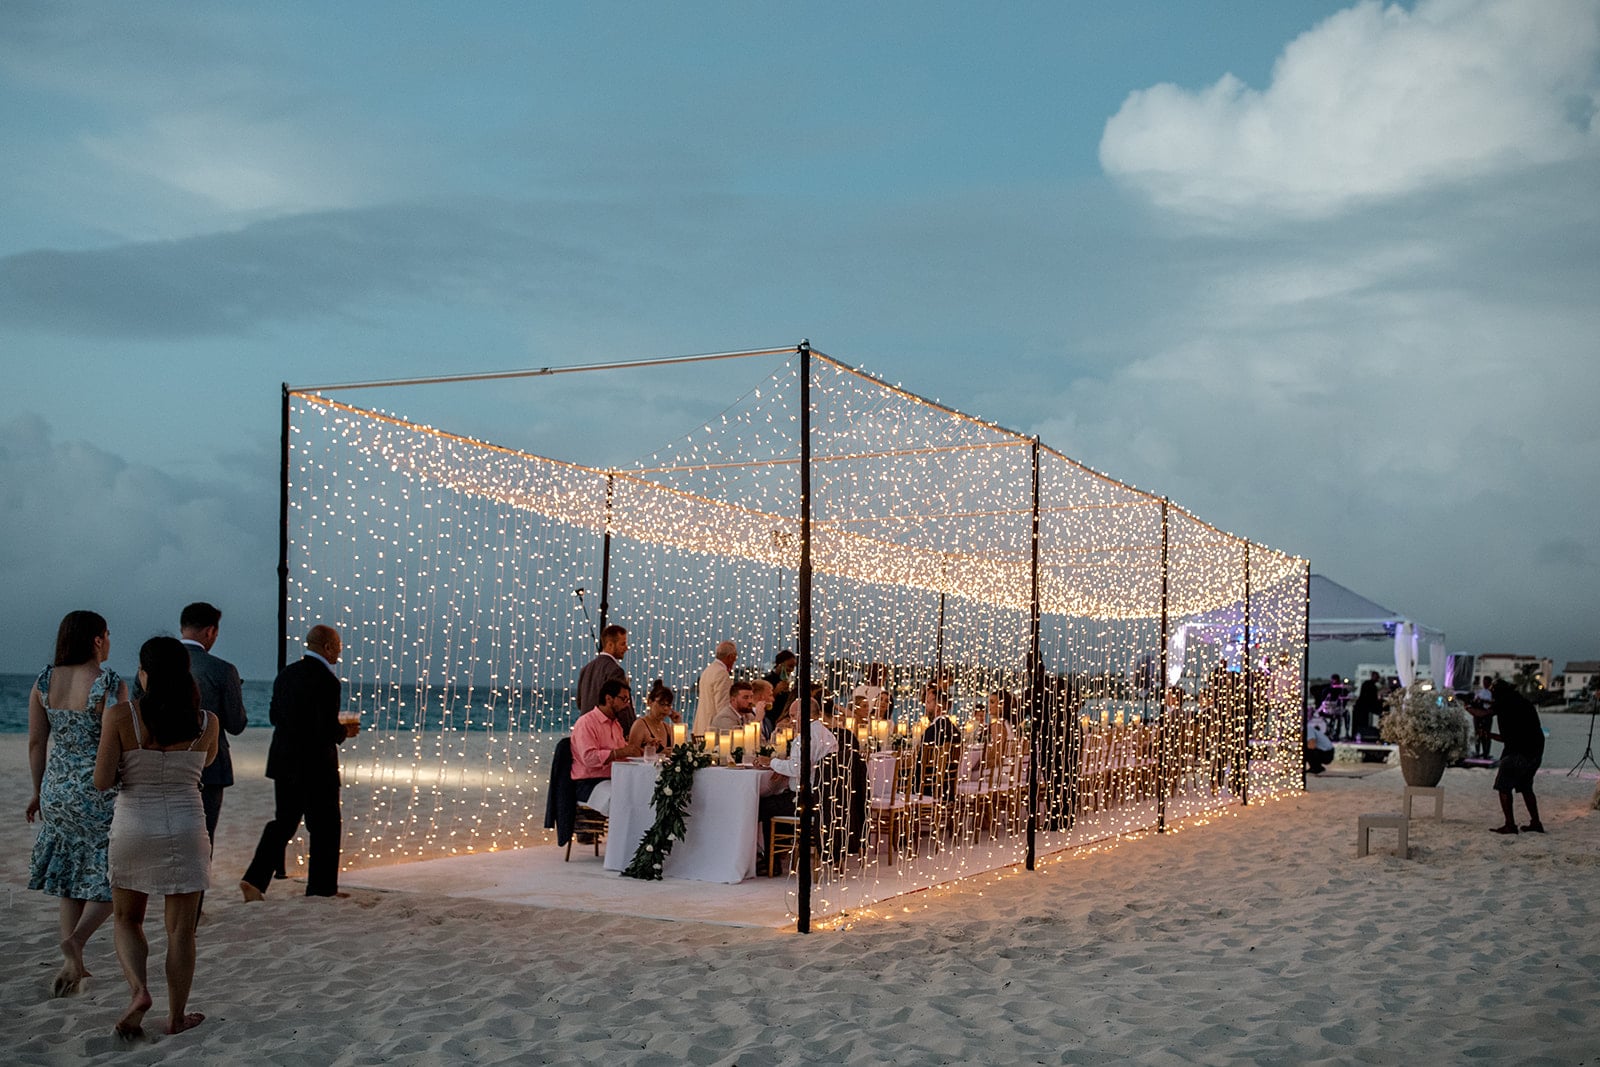 Anguilla destination wedding reception with a tunnel of lights and banquet style table